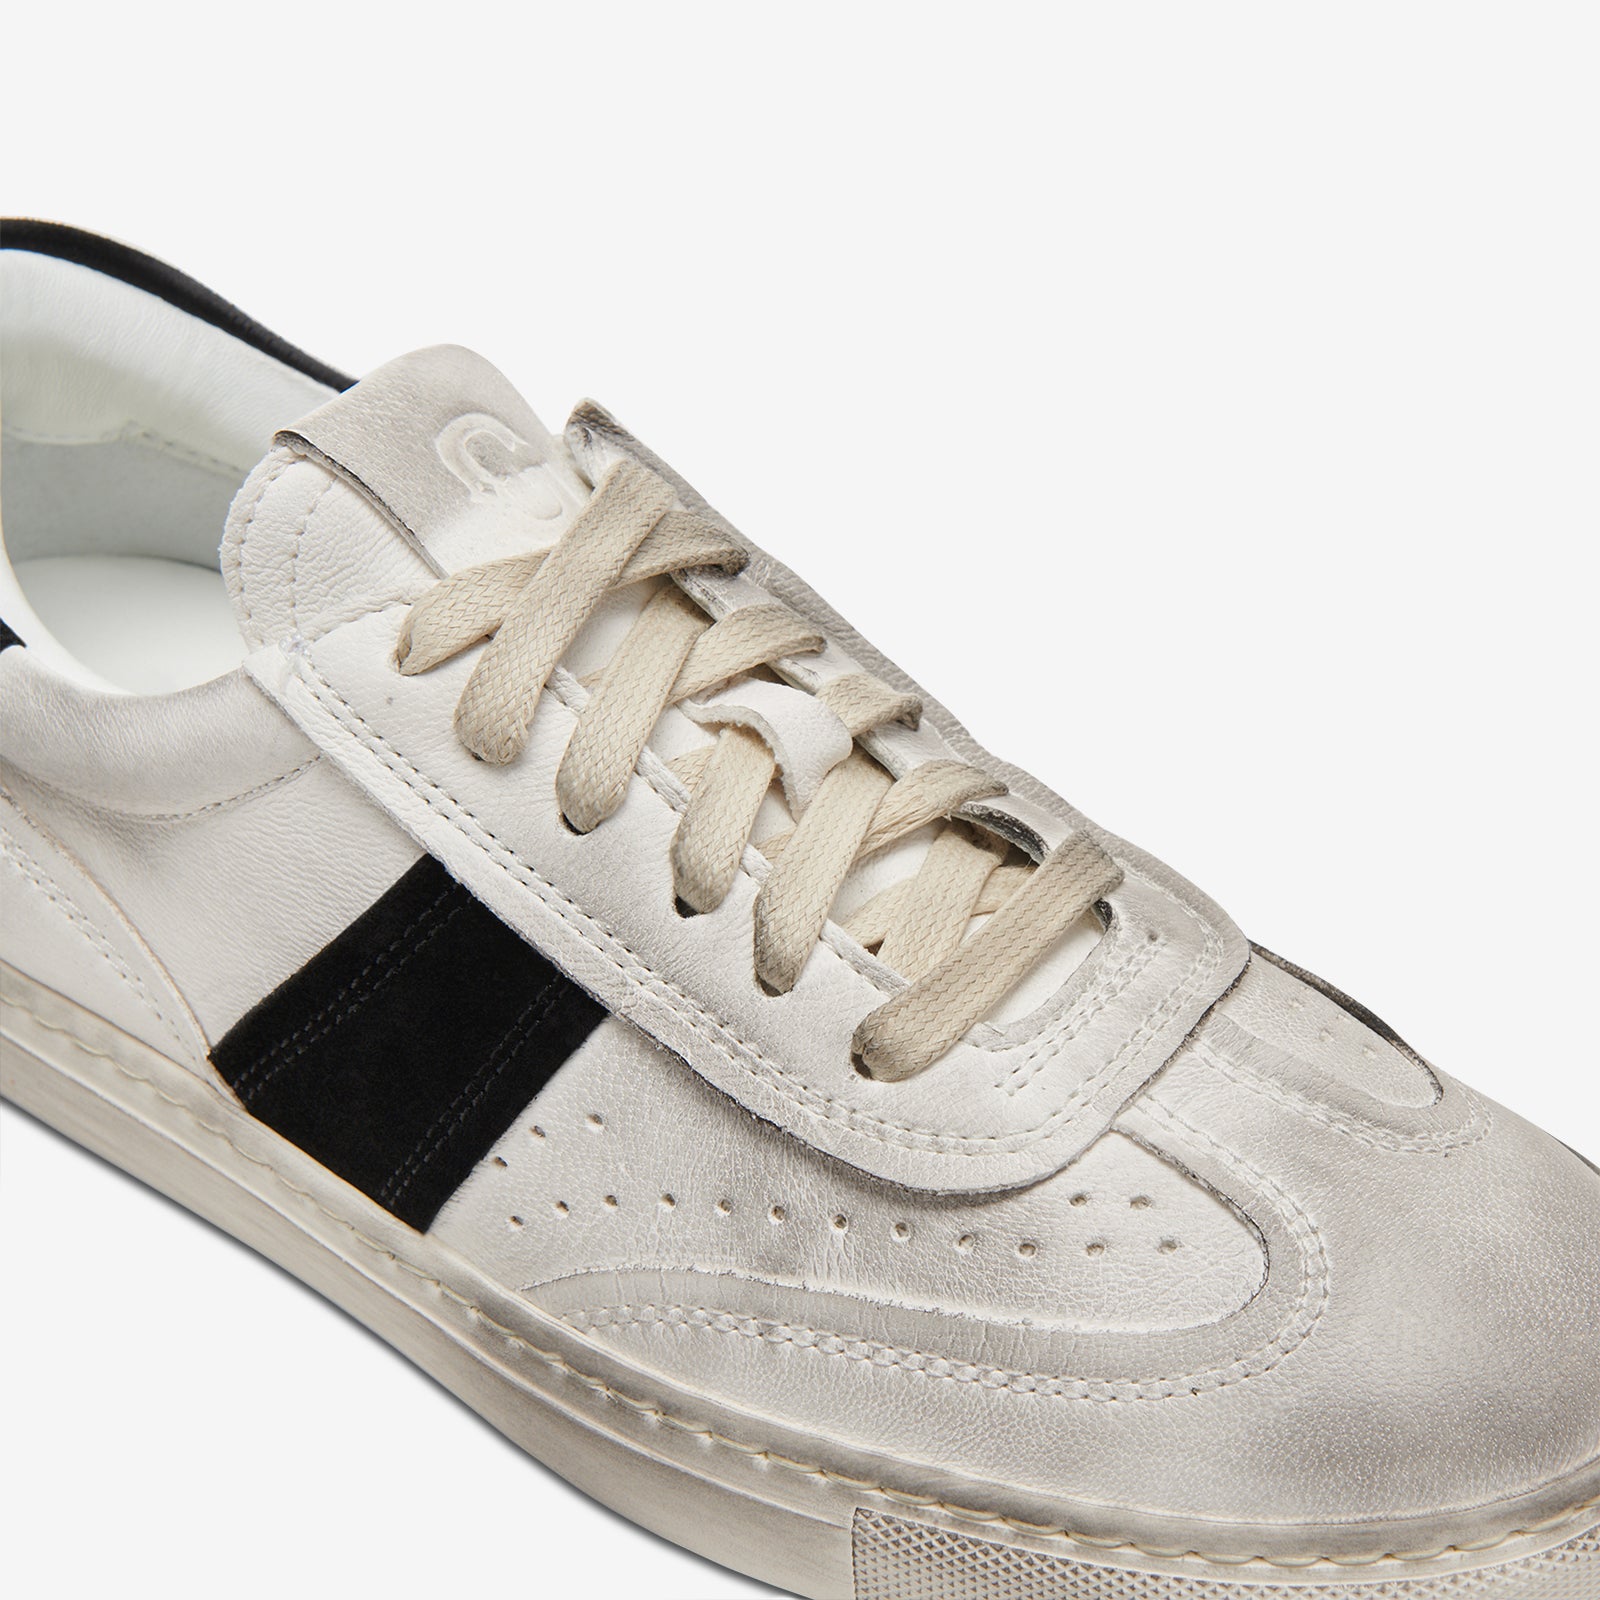 Greats - The Charlie Distressed - White/Black - Women's Shoe – GREATS